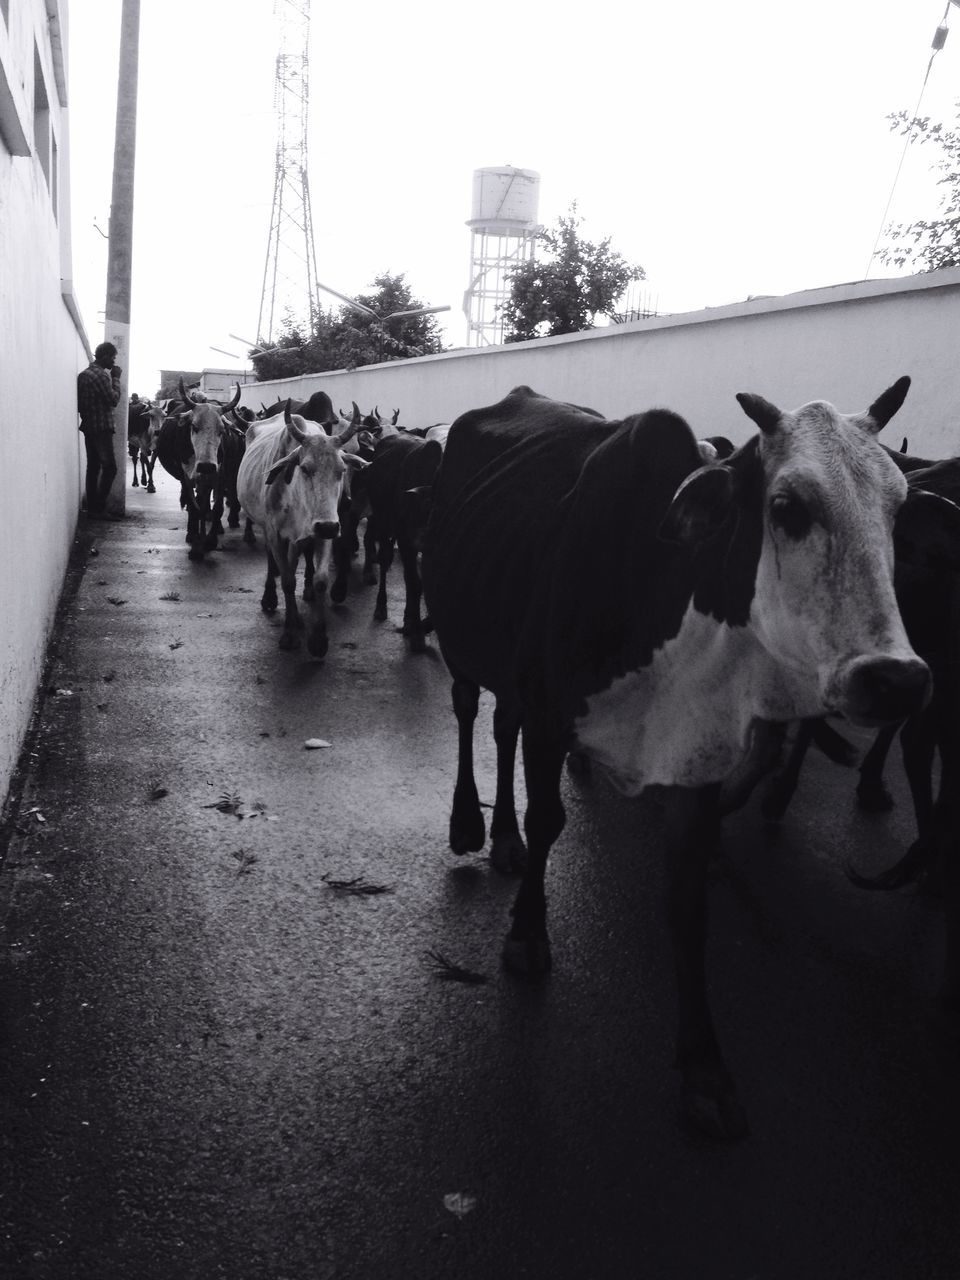 animal themes, domestic animals, livestock, mammal, horse, walking, two animals, cow, street, standing, togetherness, full length, medium group of animals, medium group of people, road, built structure, day, men, outdoors